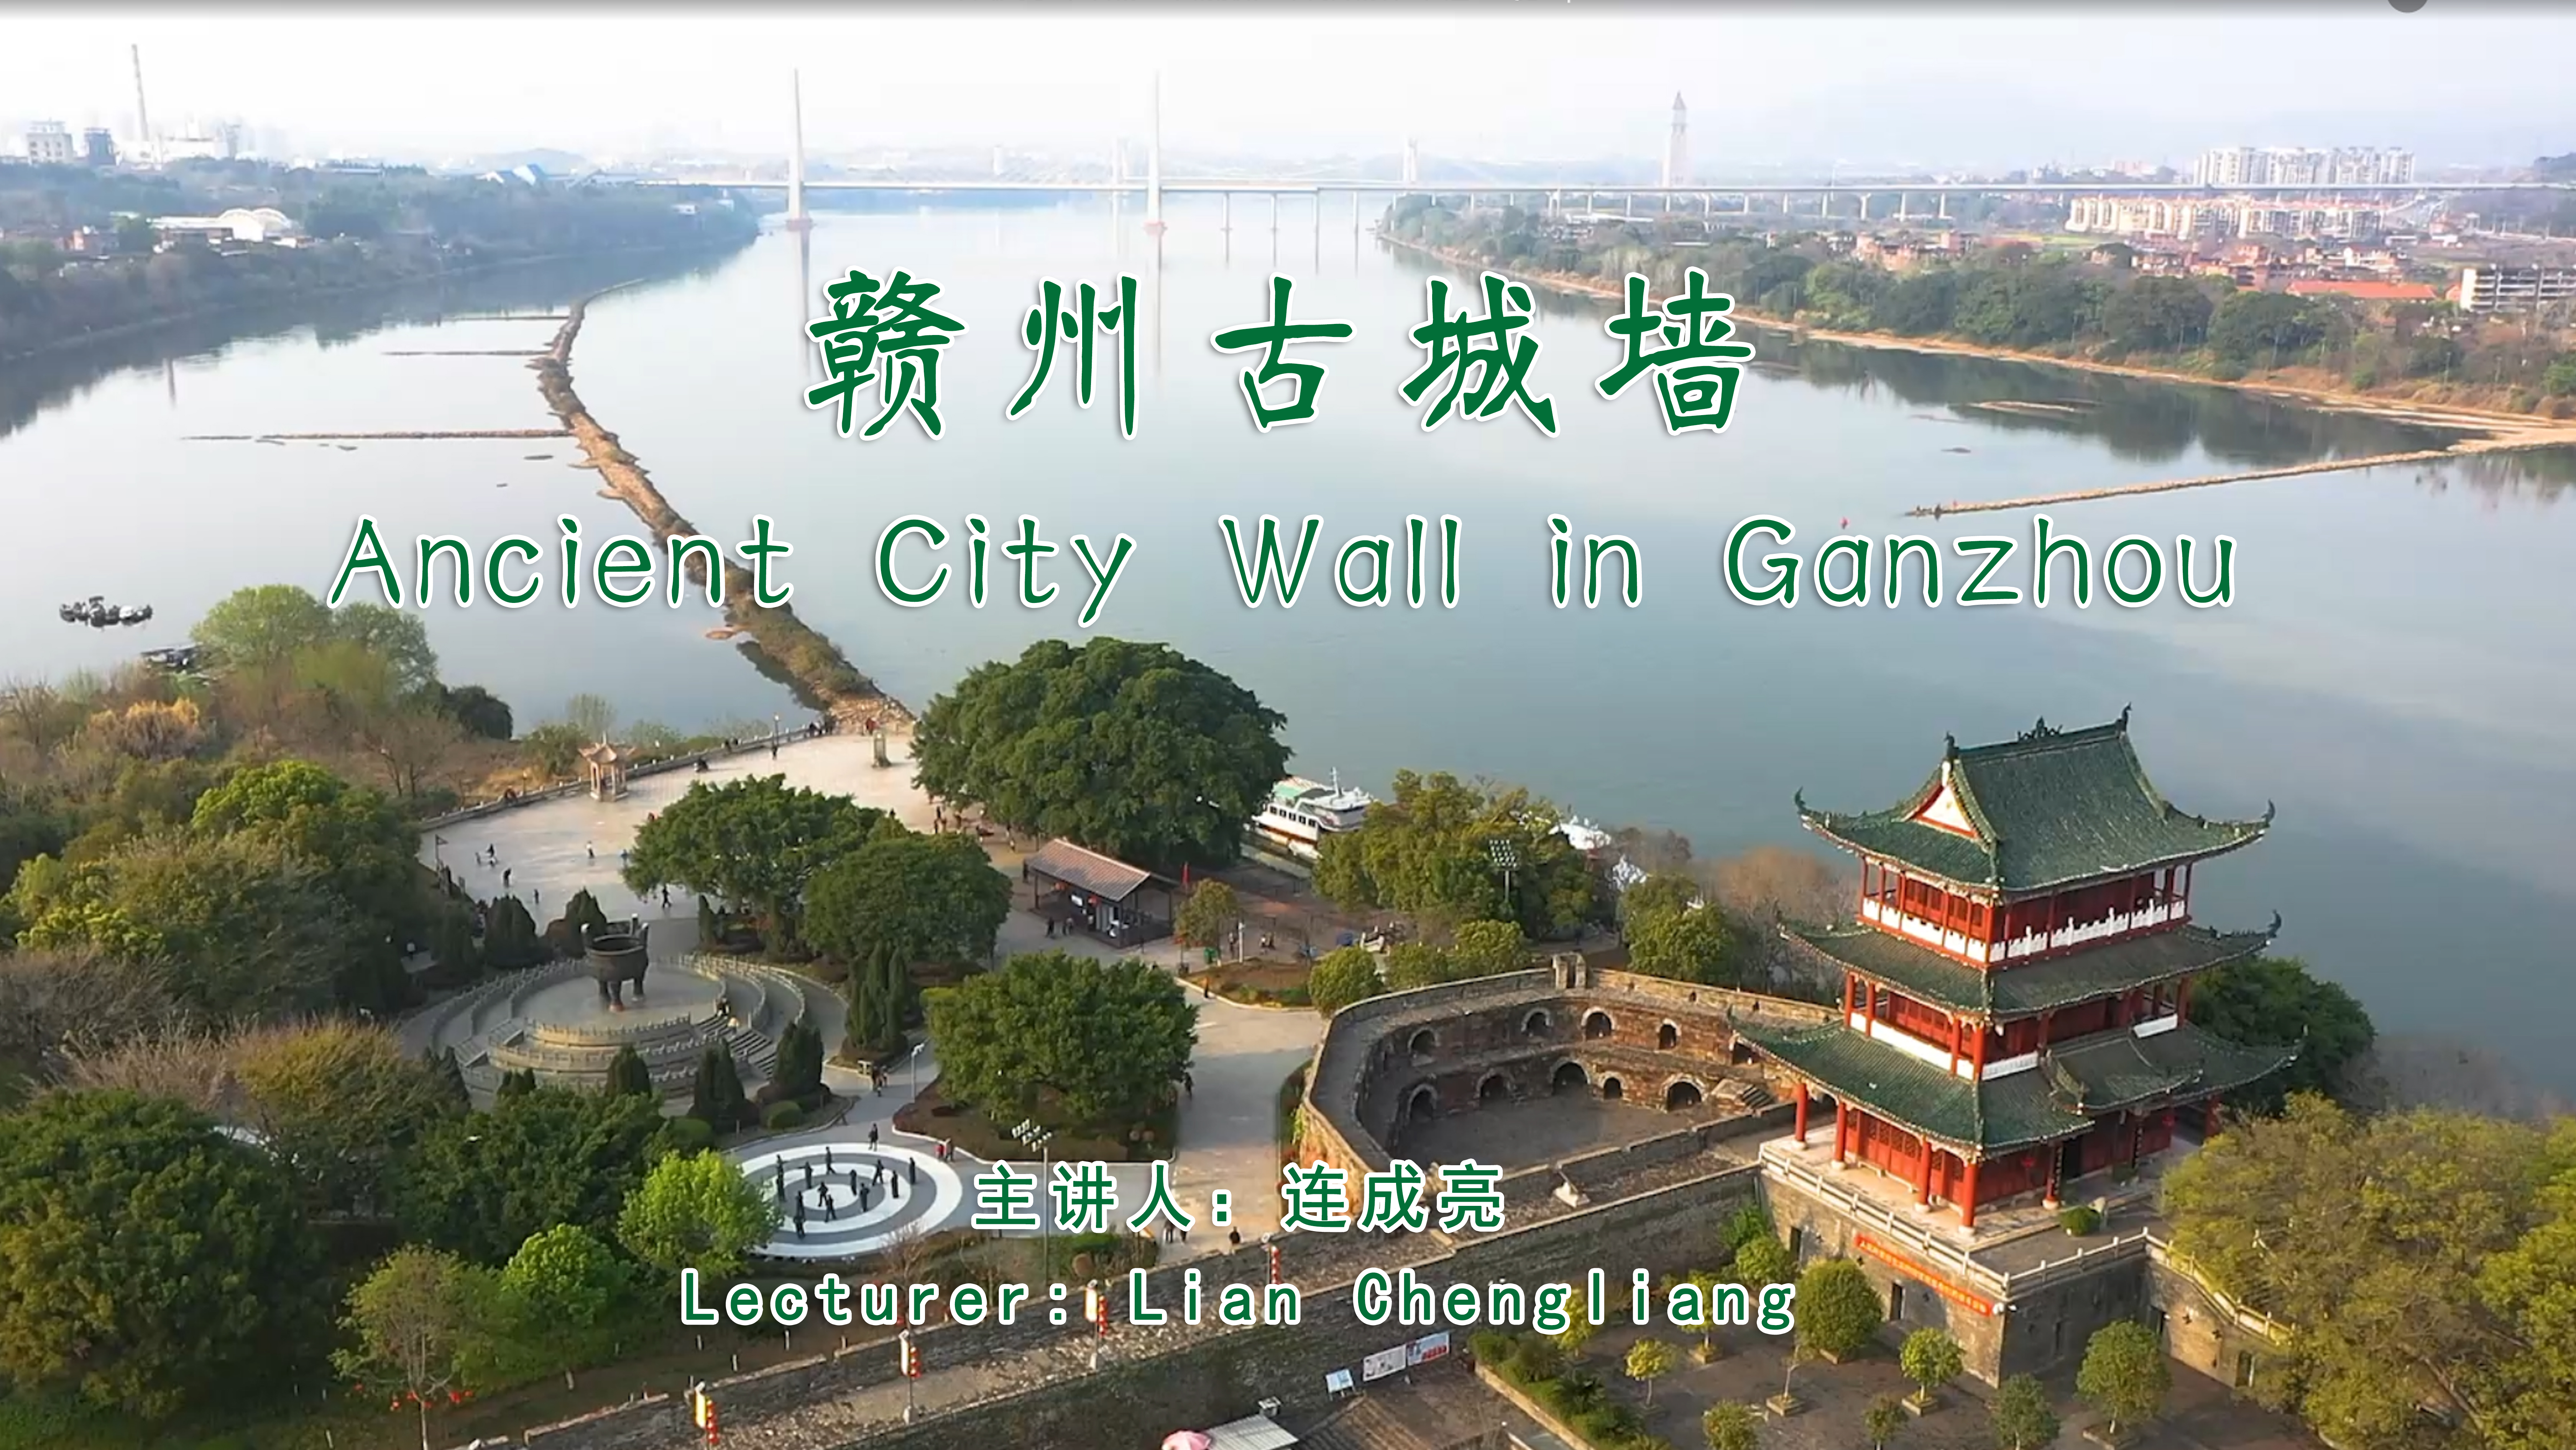 Ancient City Wall in Ganzhou